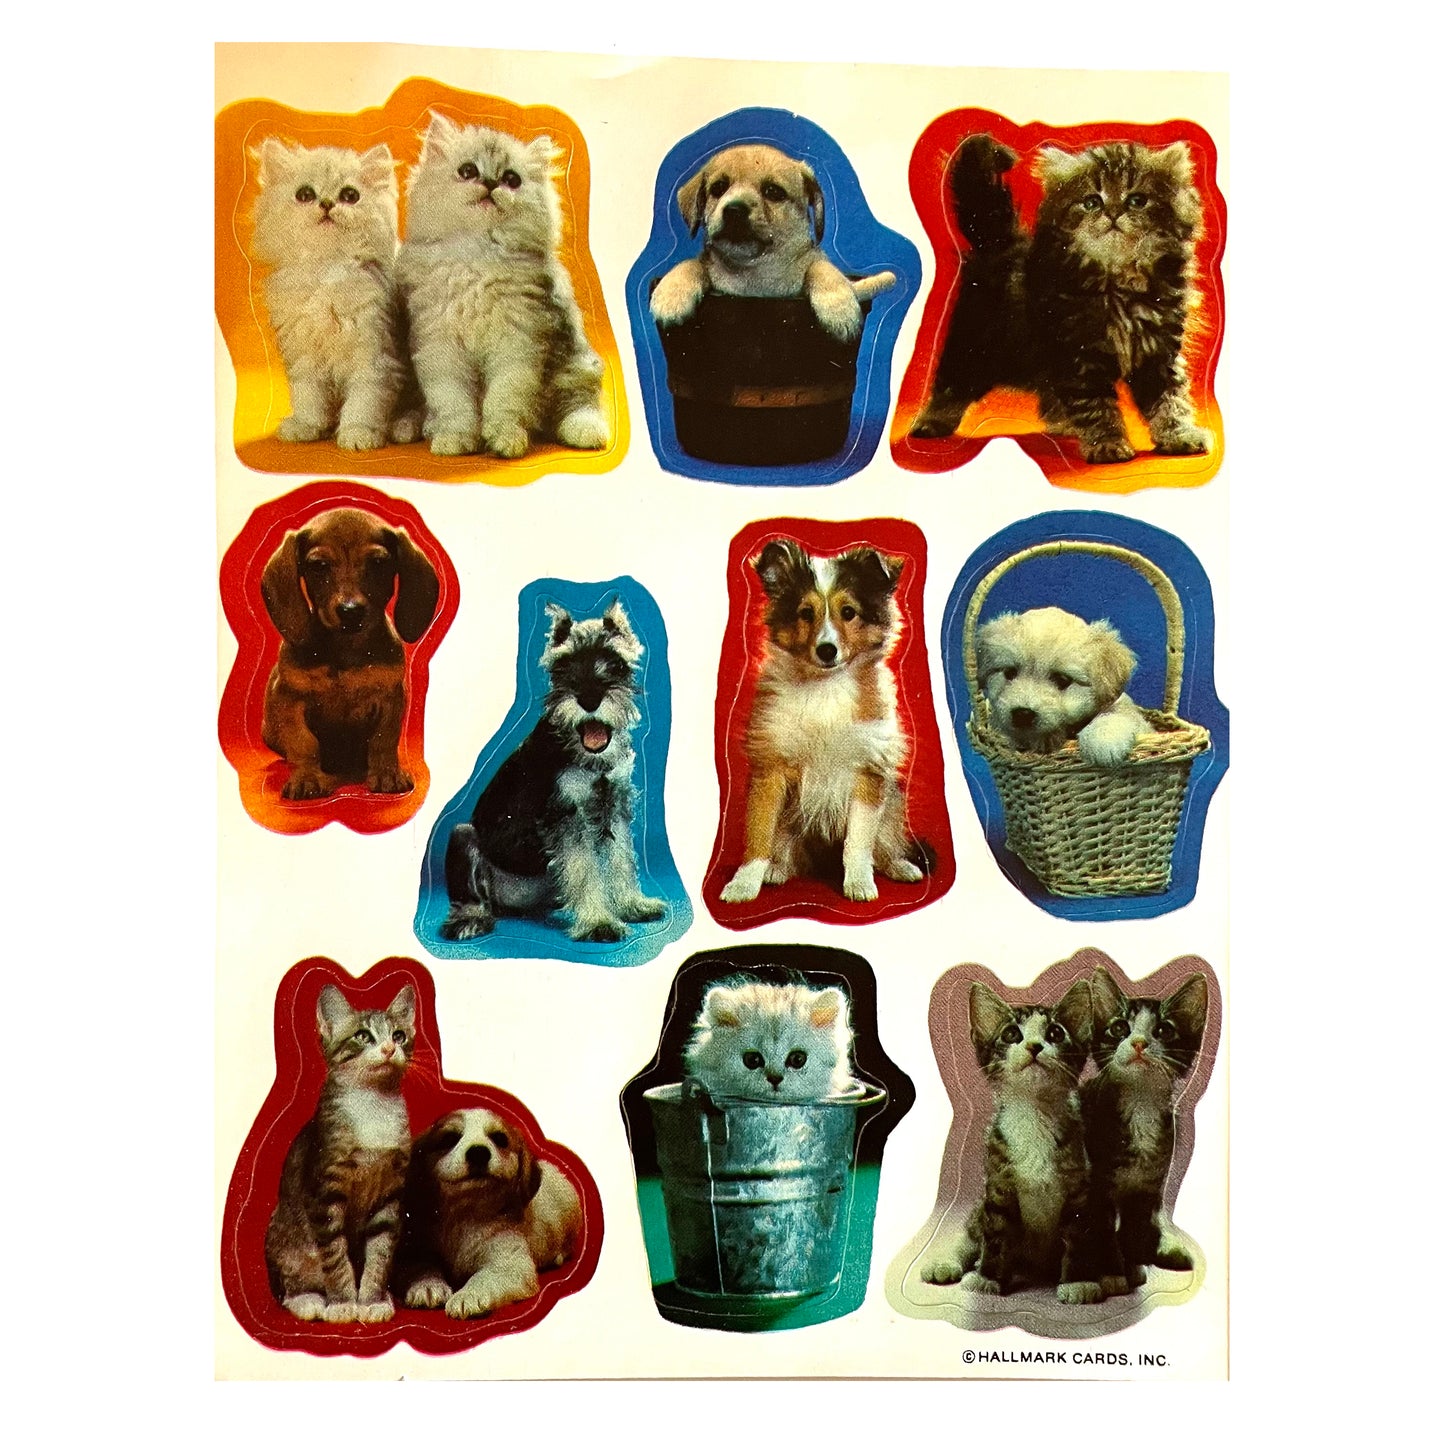 HALLMARK: Puppy and Kitten Stickers with outlines